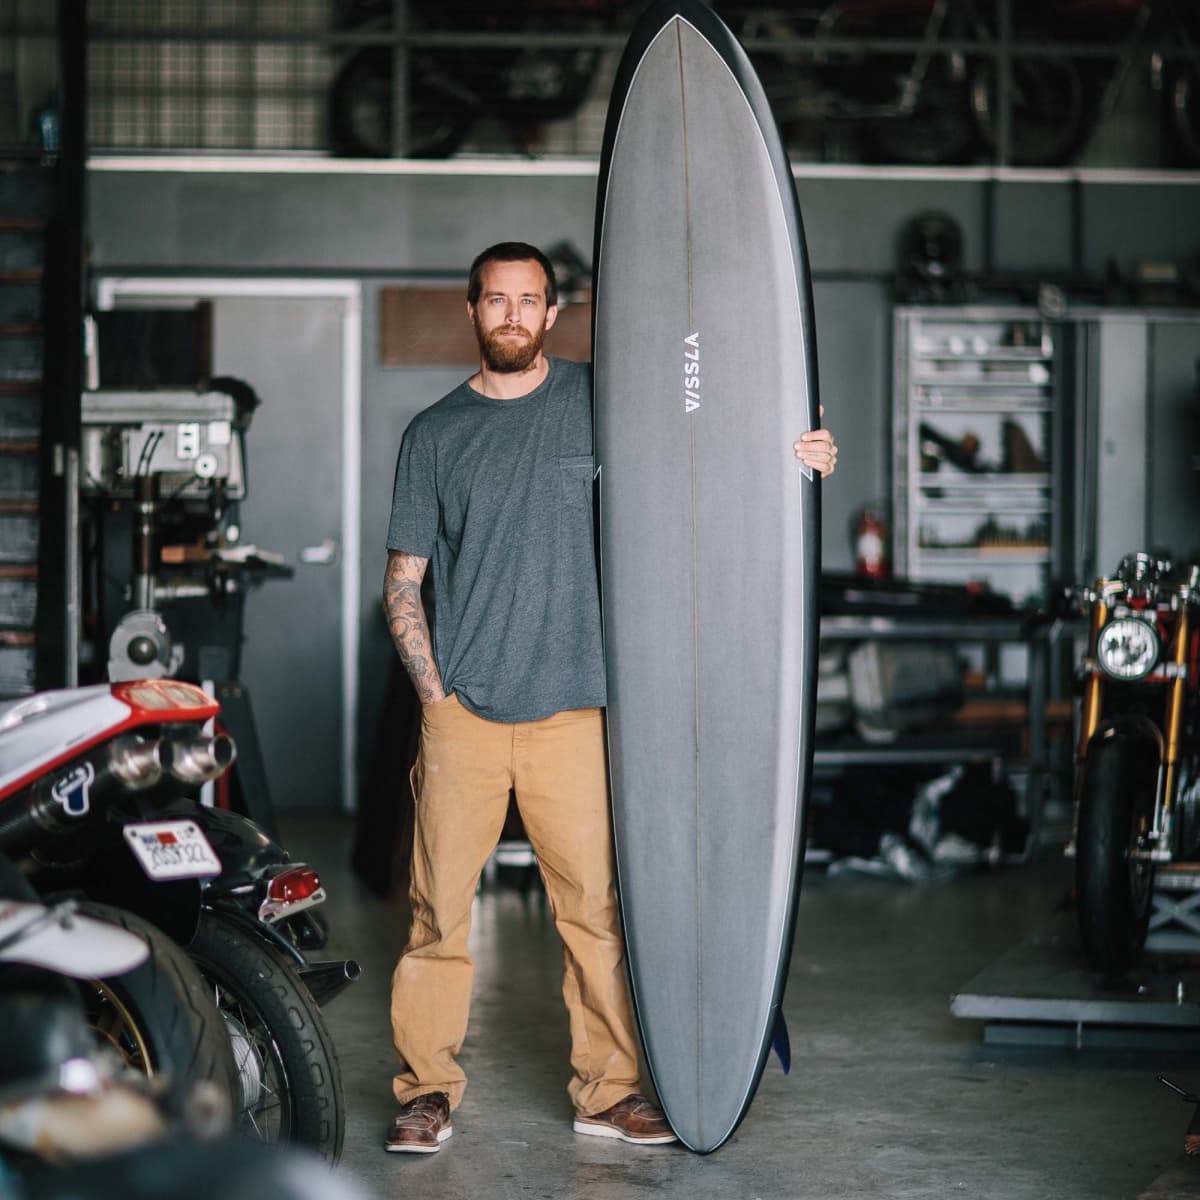 And Now a Gorgeous Surfboard: Jeff McCallum's Kimbo Twin Fin - Surfer